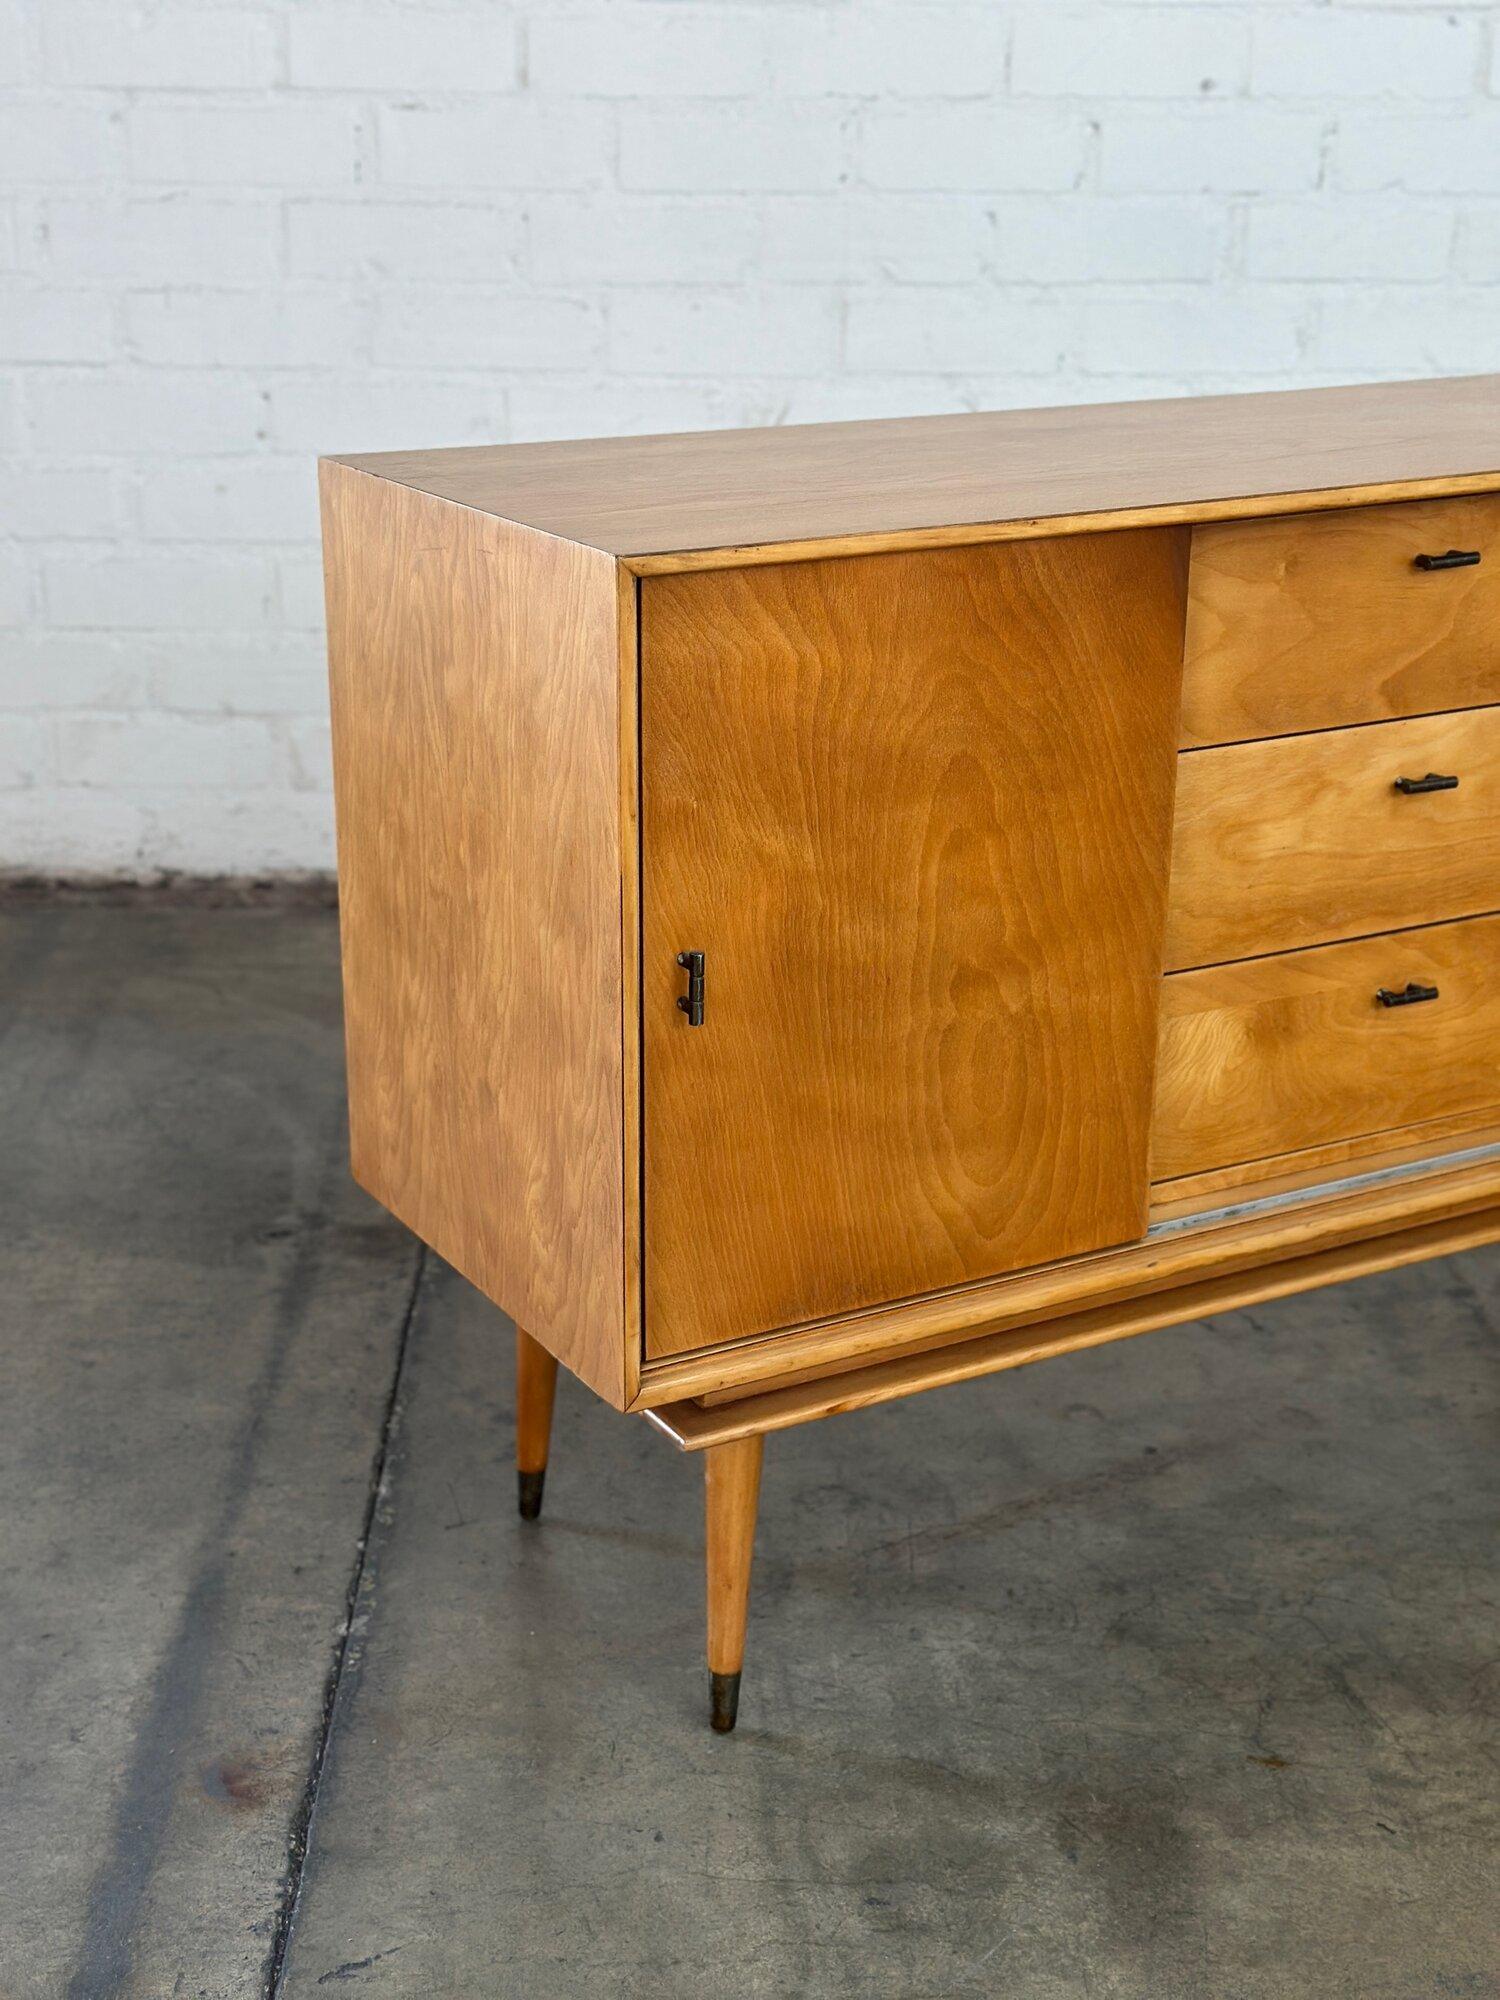 W48 D15.75 H30.5

Fully restored maple credenza very reminscnet of item by Paul McCobb. Items feature very nice grain patern, tapered angled legs, and still has orginal hardware.  Item features open and closed storage. Unit has one media hole in the